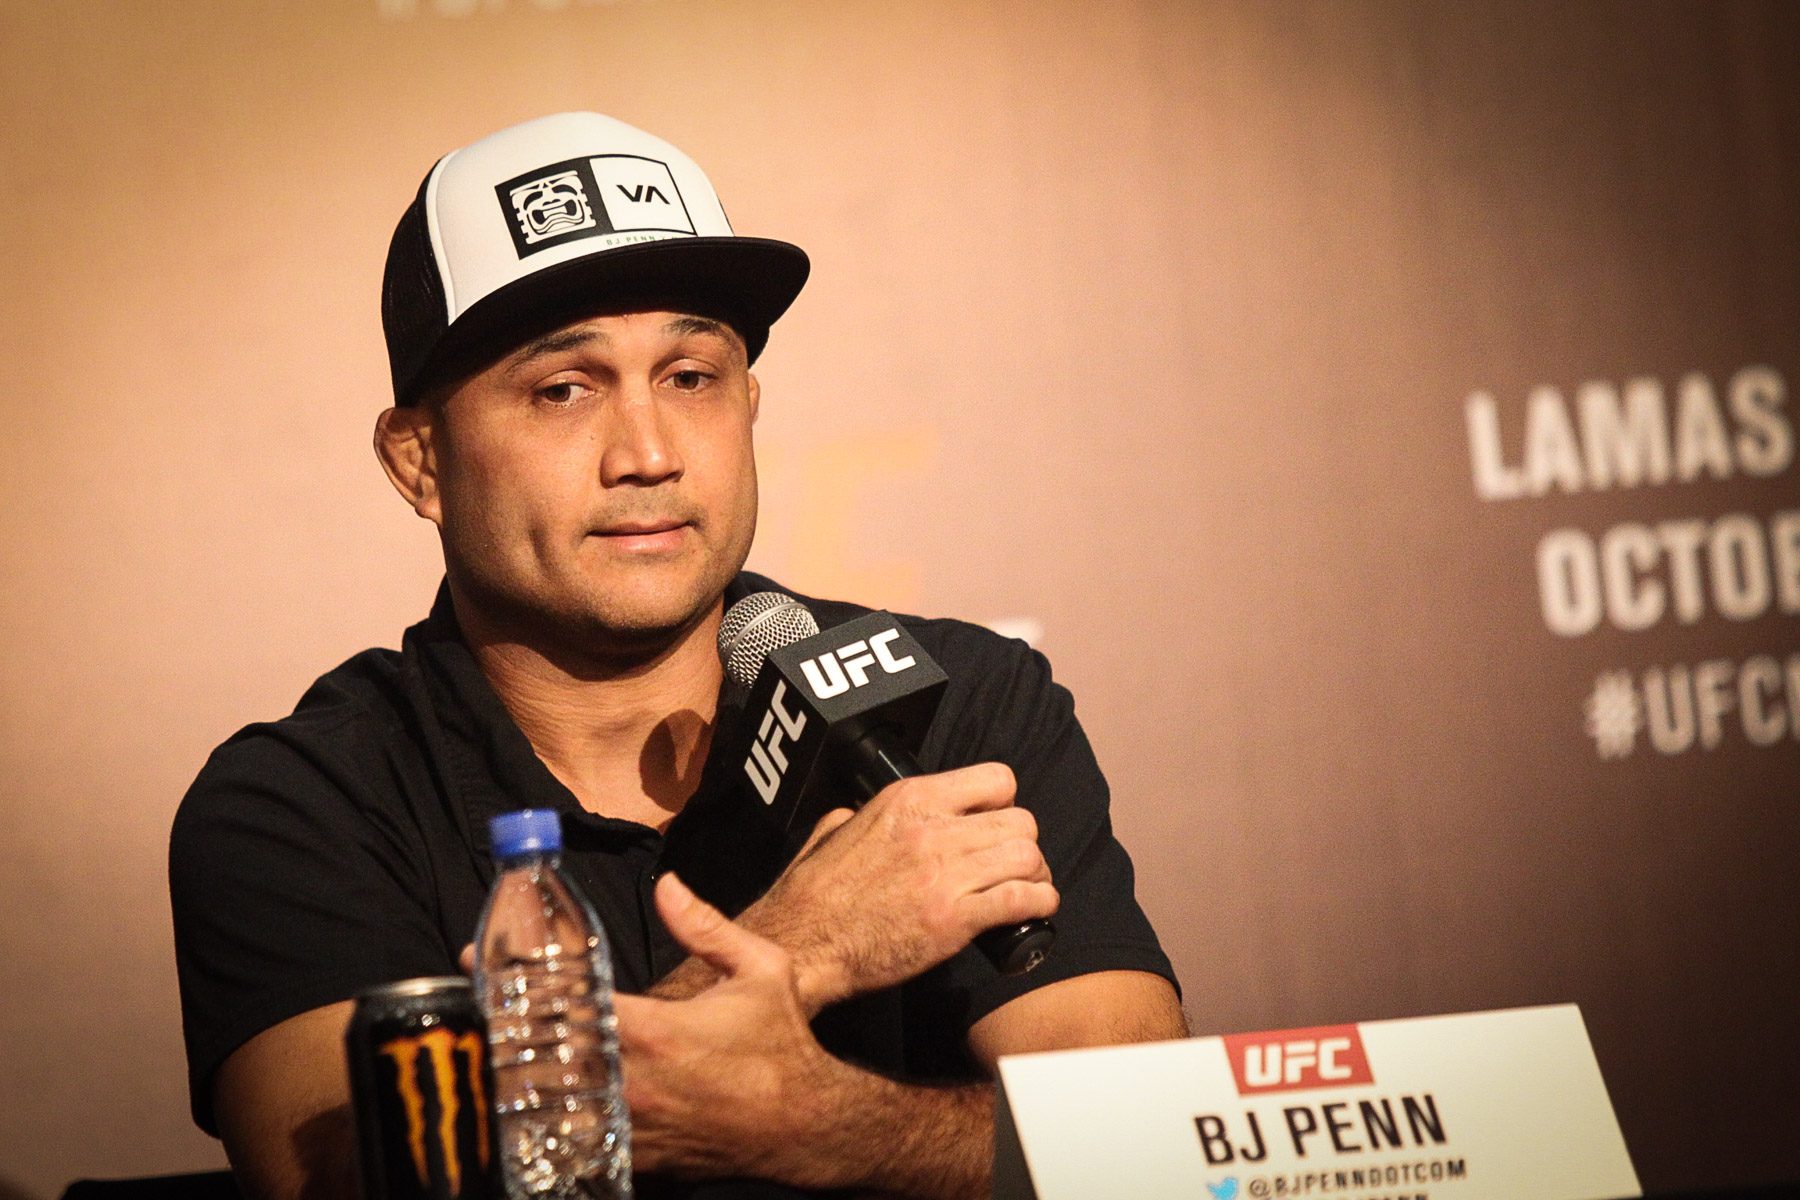 BJ Penn is out to prove critics wrong in UFC comeback